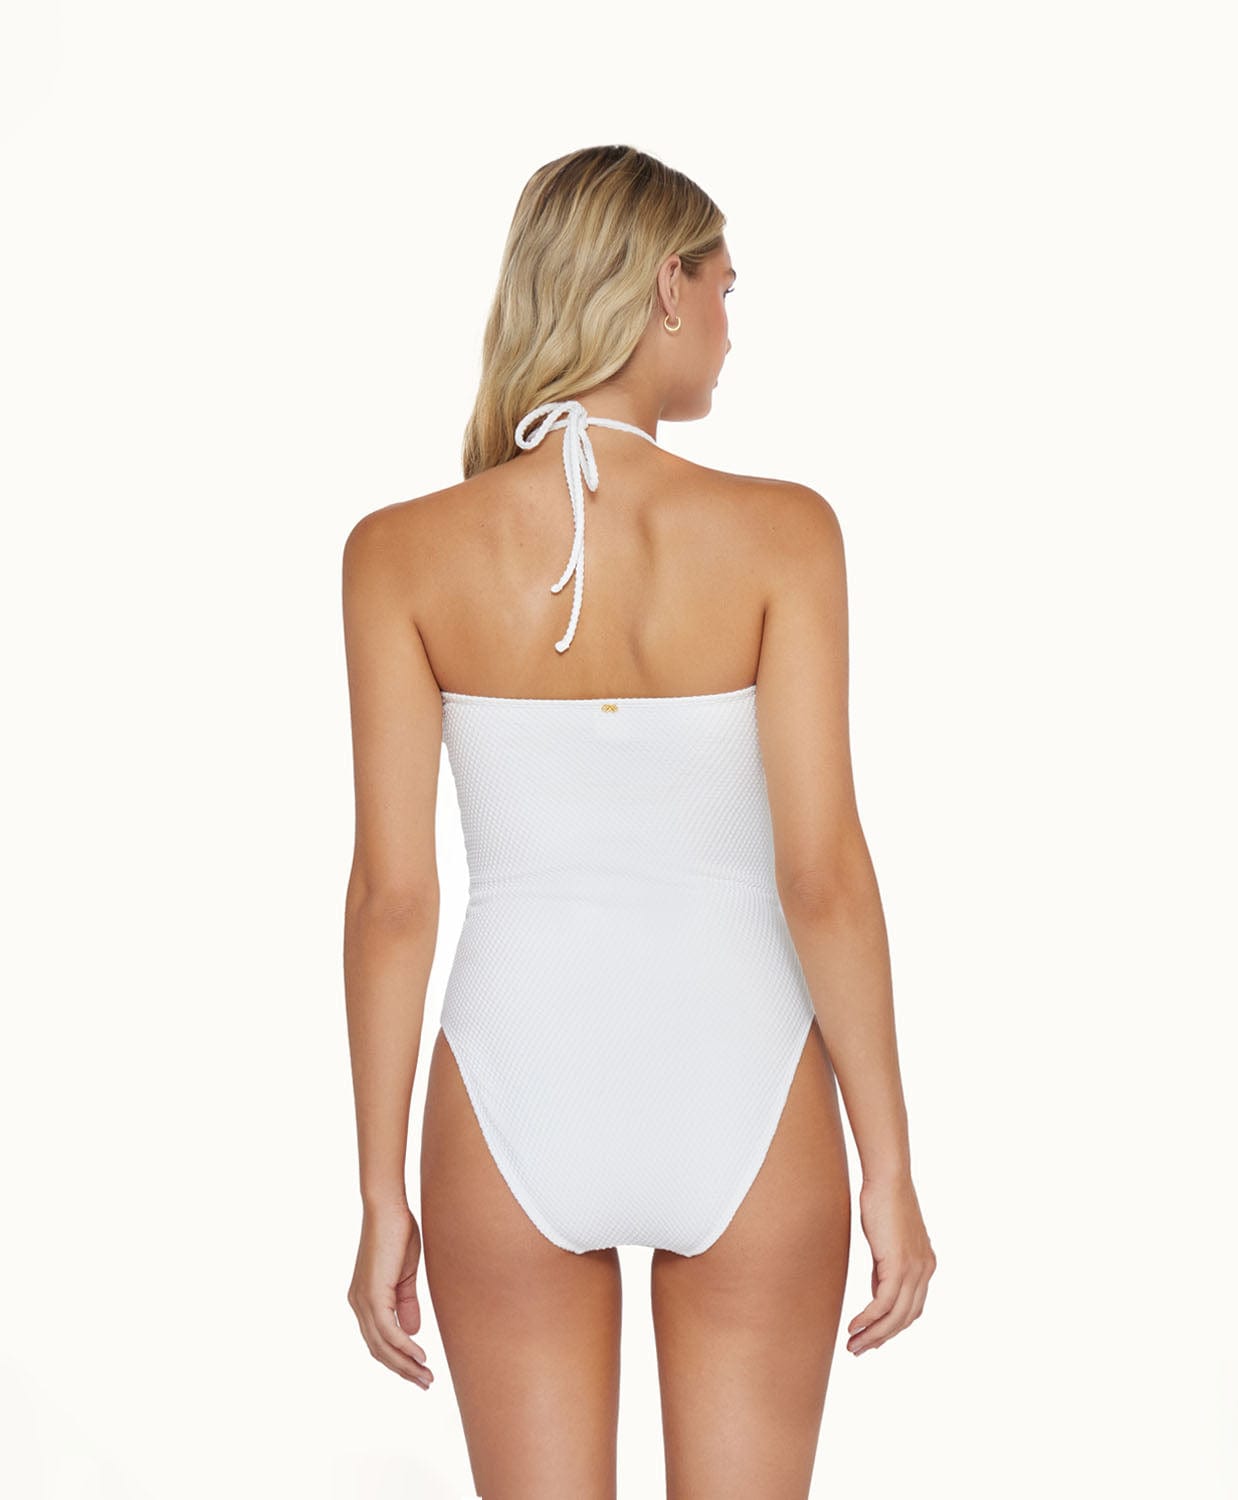 Back view of blonde woman wearing a white one piece in front of a white background. 